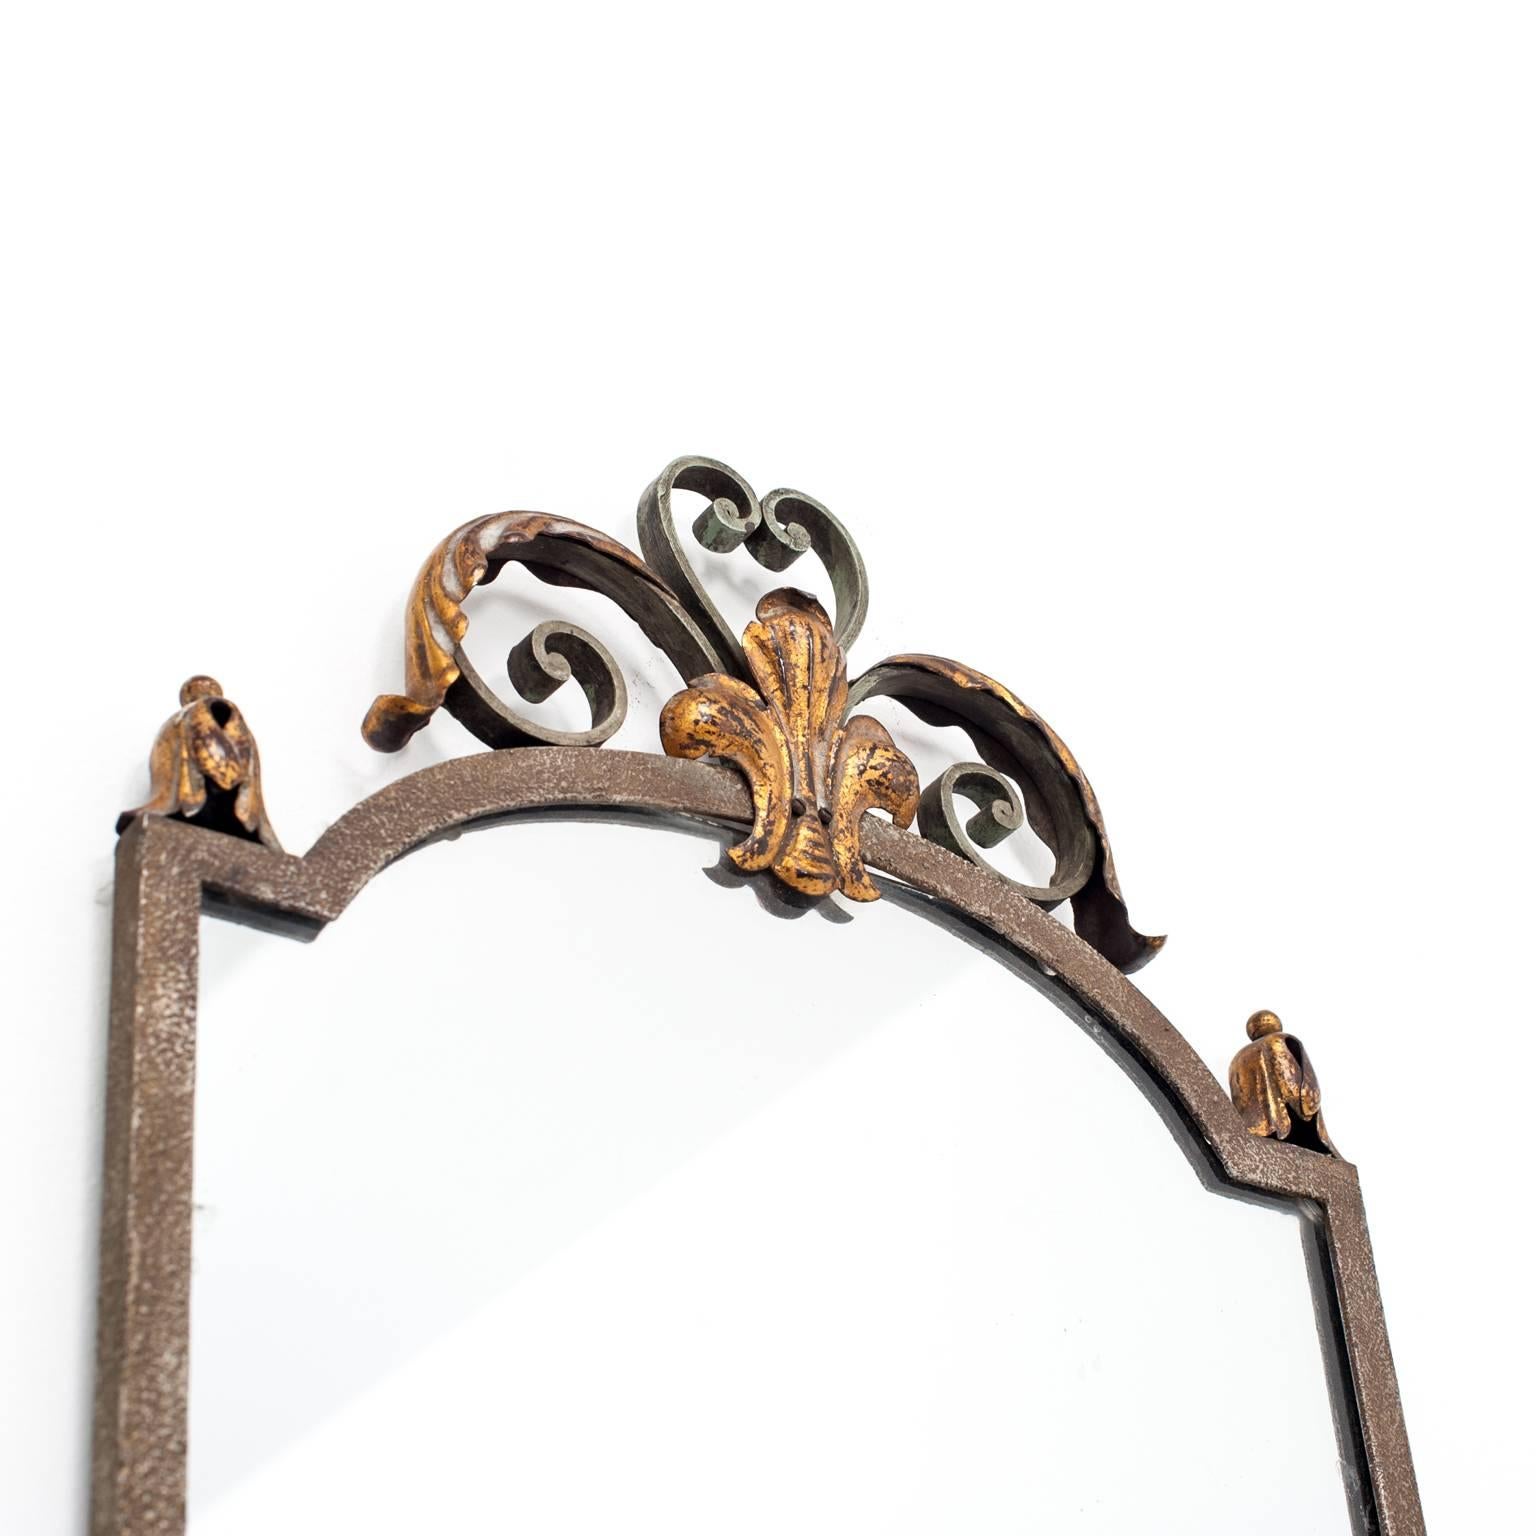 French mirror, manufactured in iron and gilt metal, with top acanthus leaf and scroll ornaments.